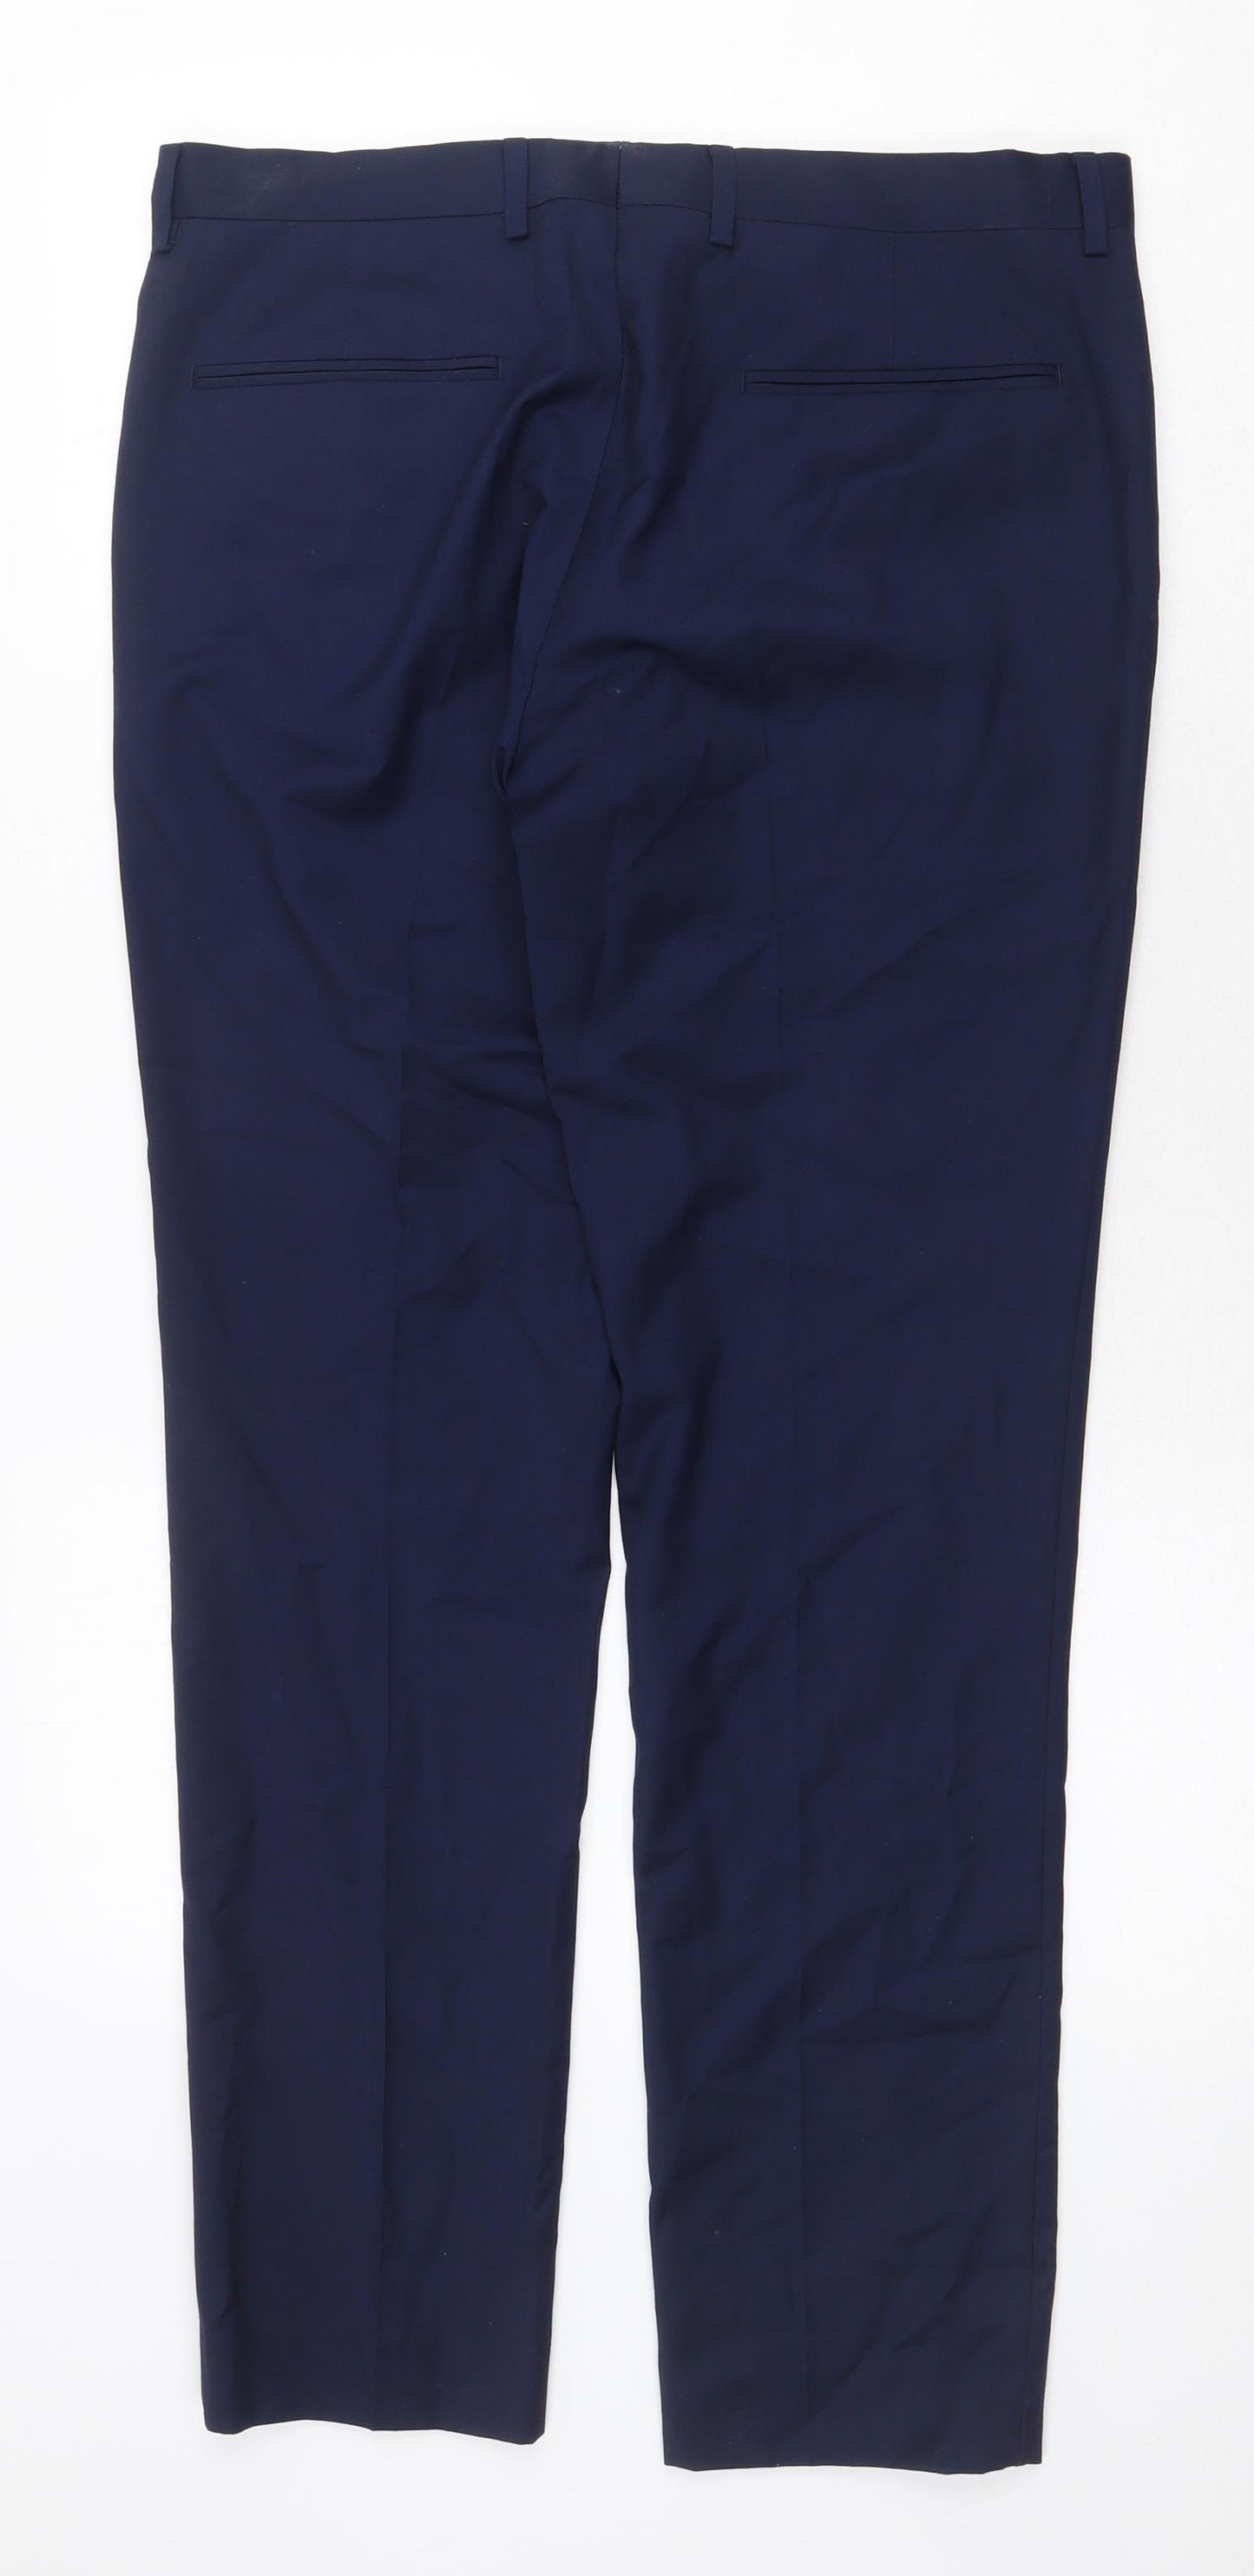 River Island Mens Blue Polyester Dress Pants Trousers Size 32 in Regular Zip